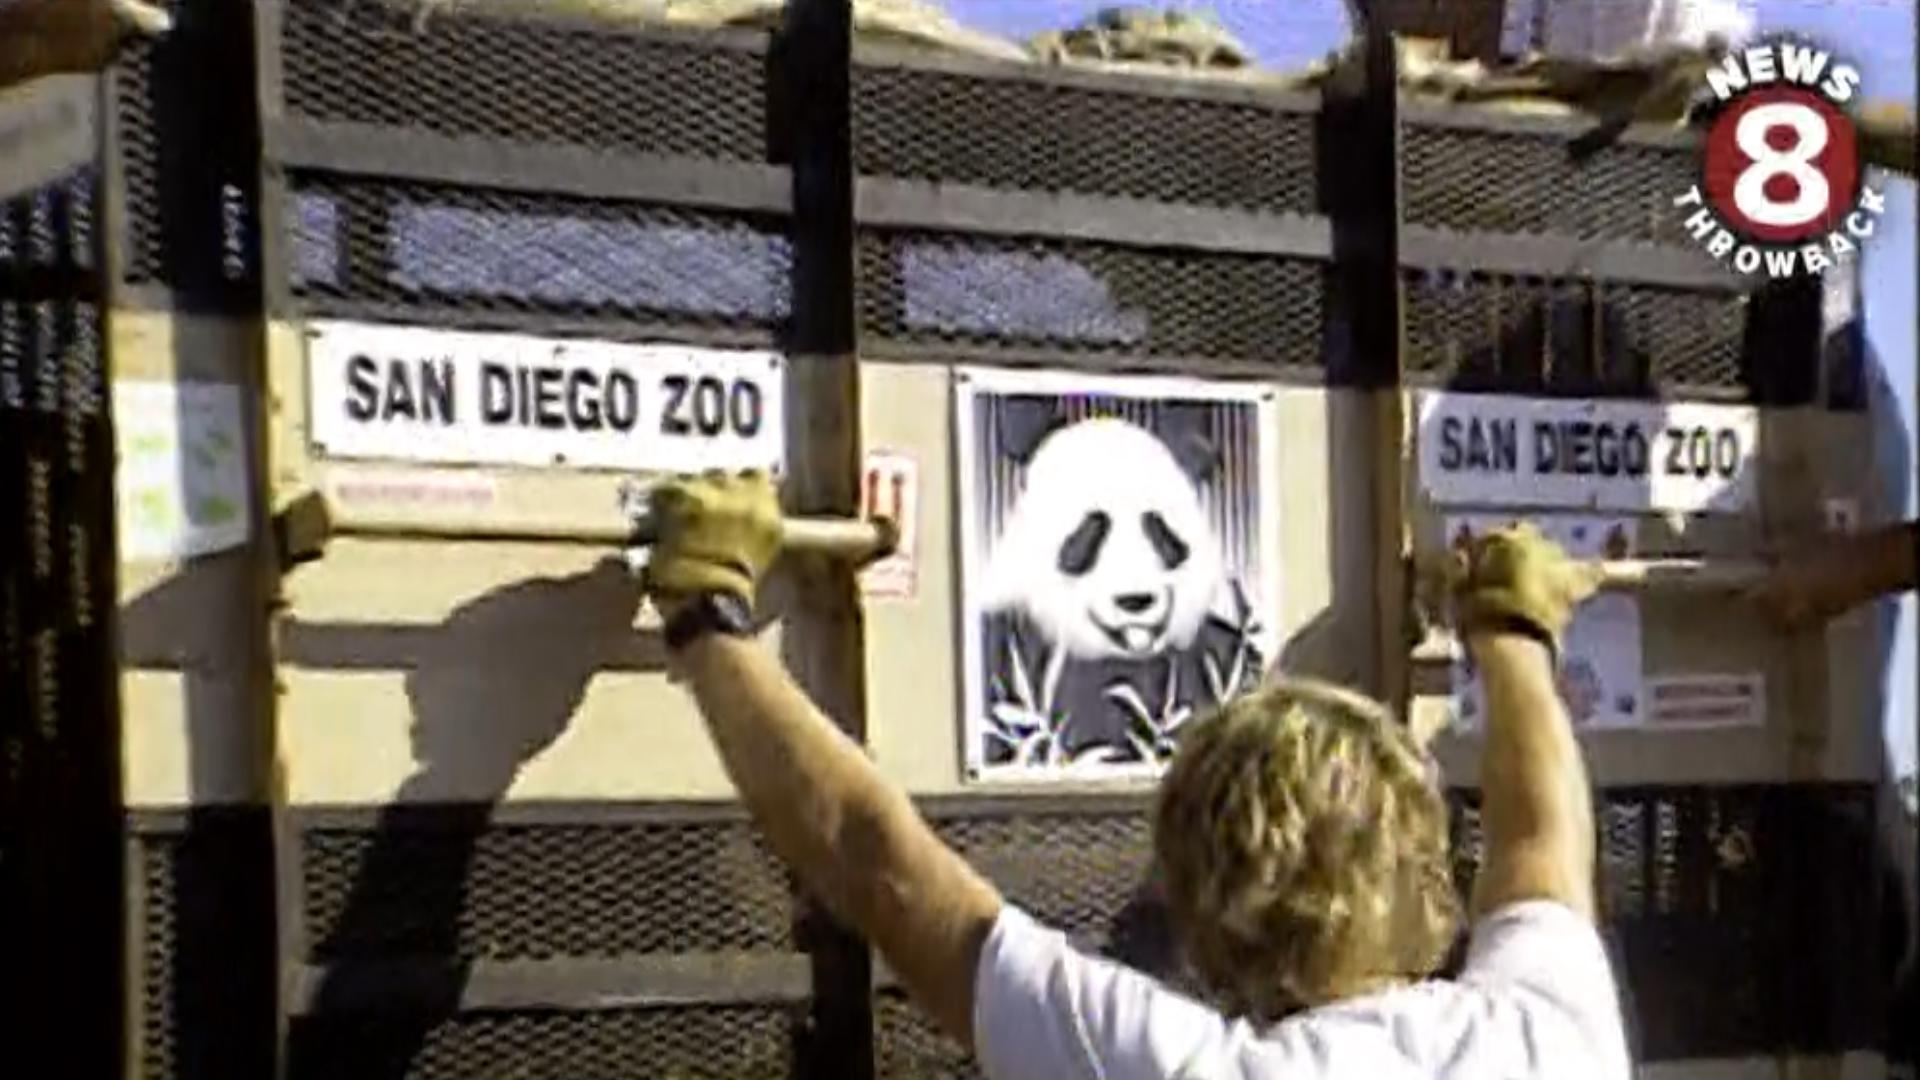 In September 1996,  two giant pandas, Bai Yun and Shi Shi, arrived from China to begin what was planned to be a 12-year stay at the San Diego Zoo.